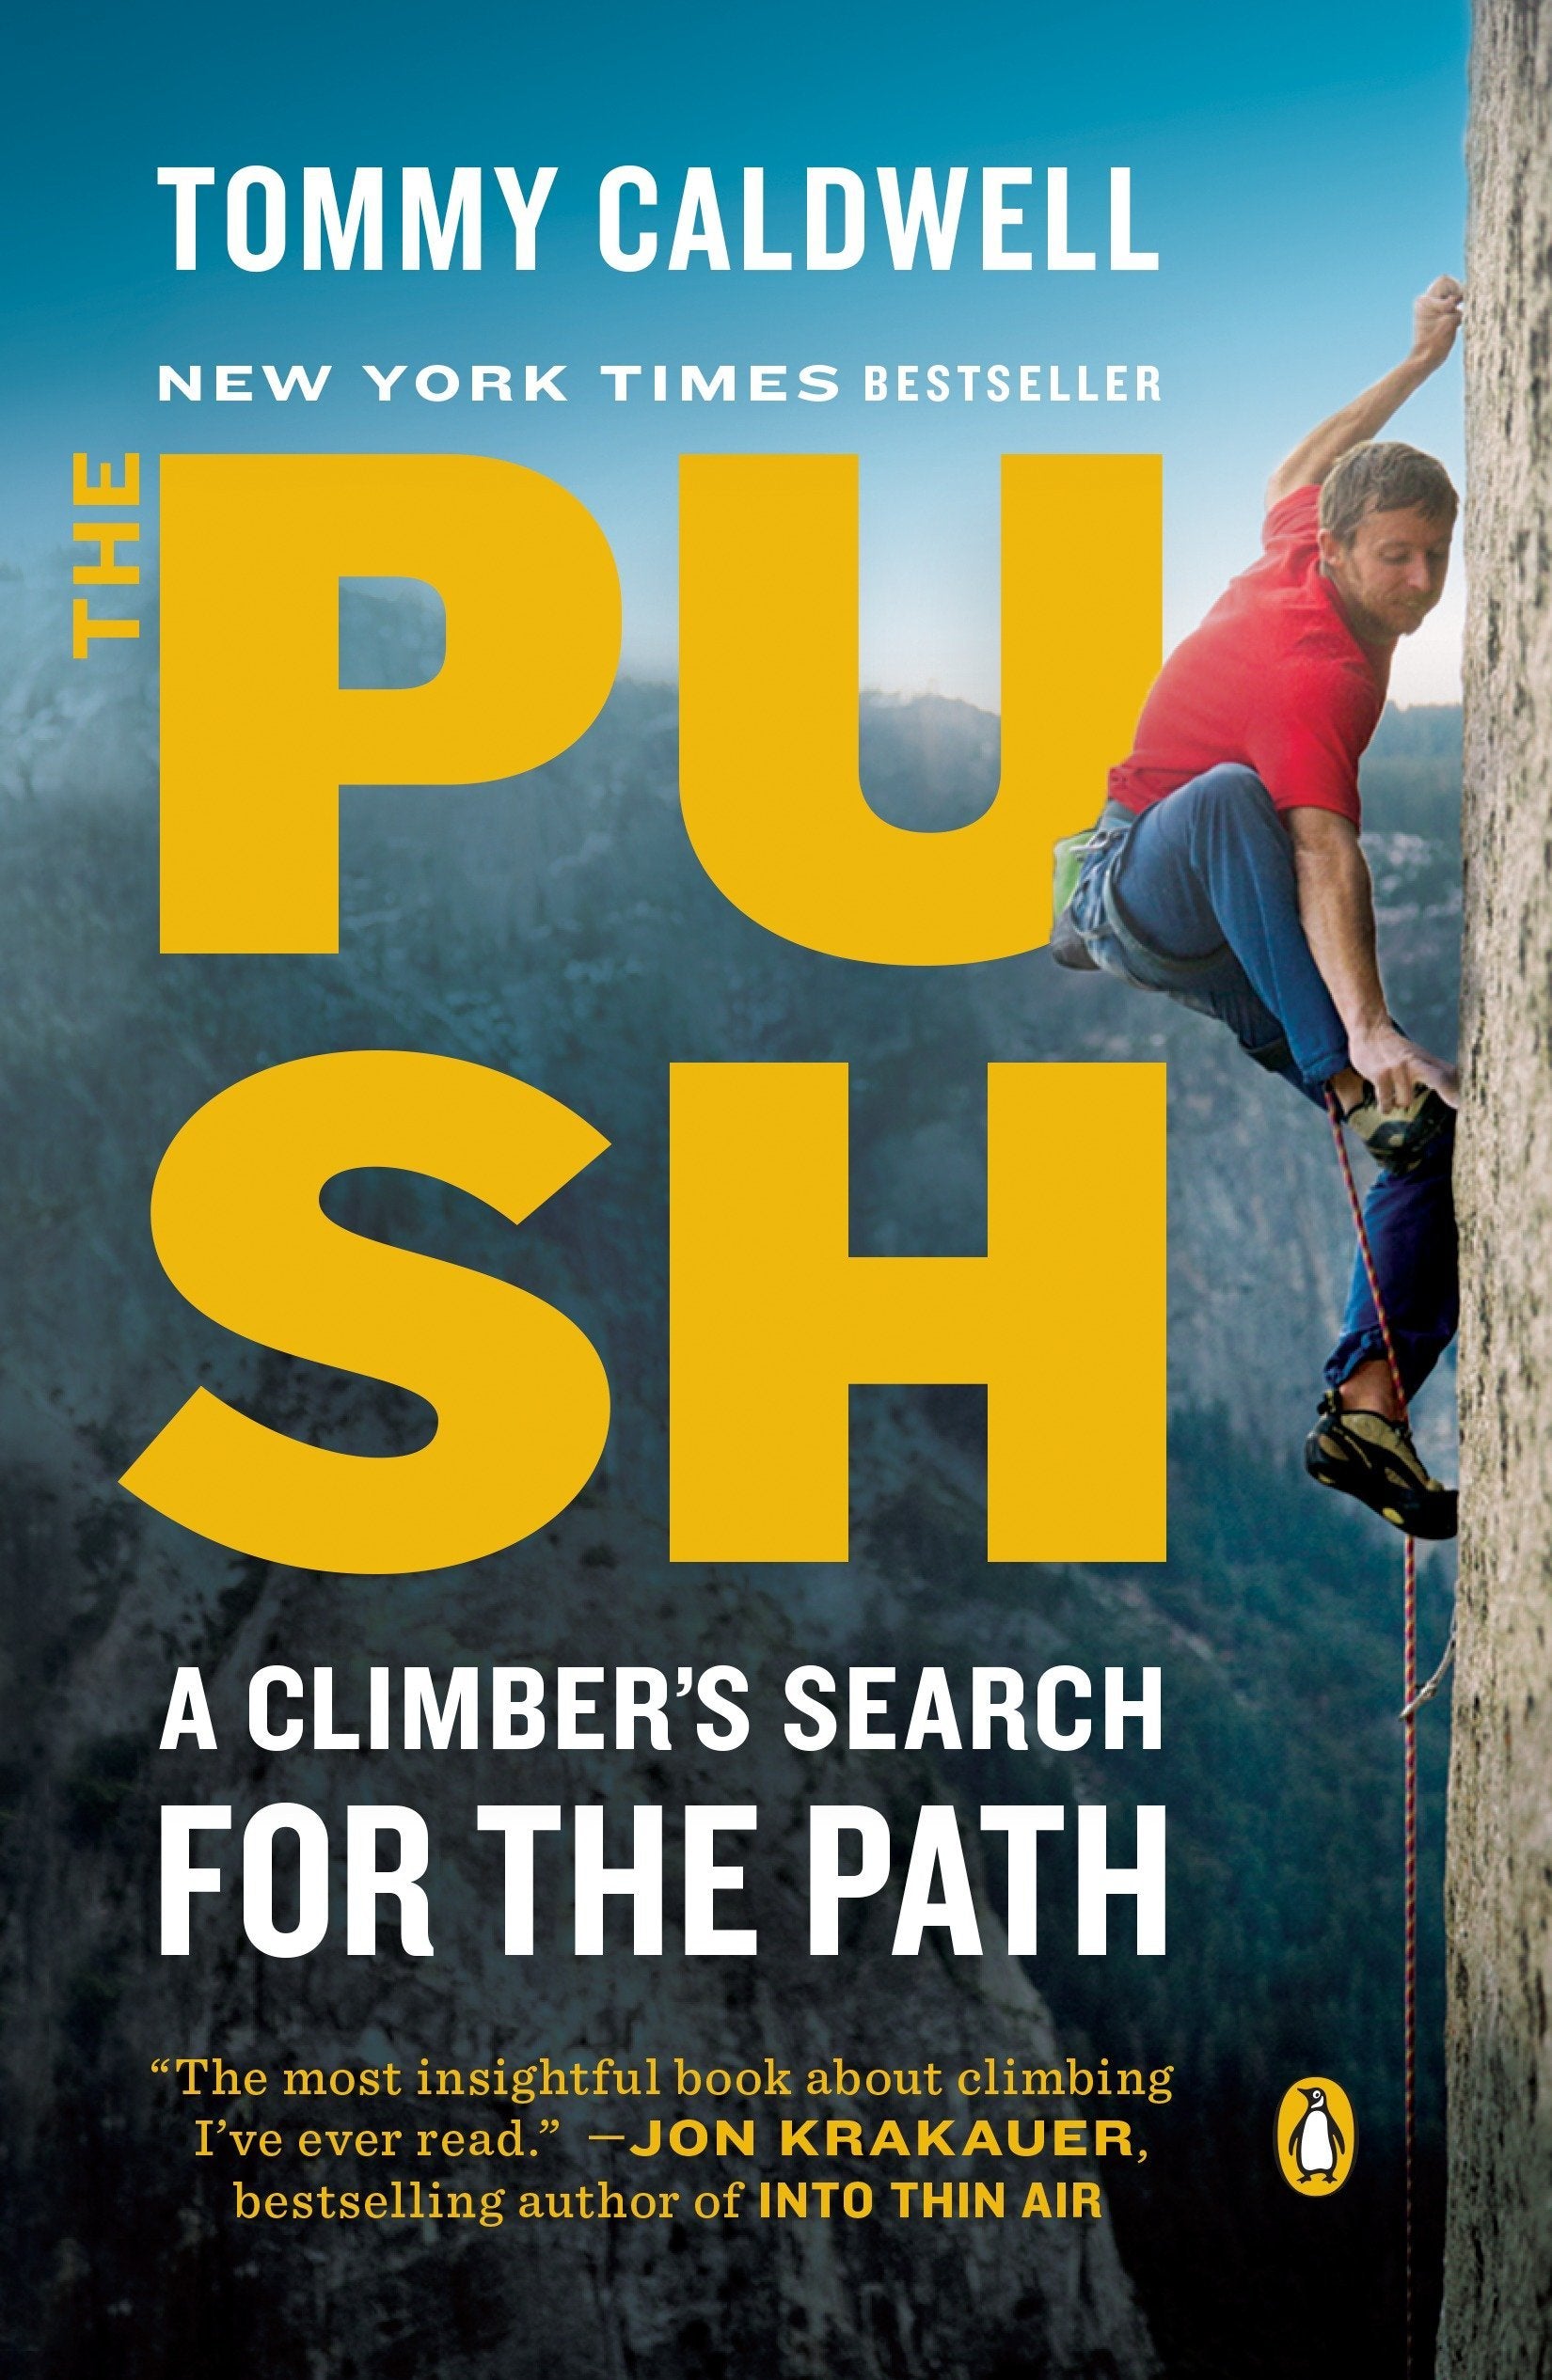 The Push: A Climber's Search for the Path by Tommy Caldwell